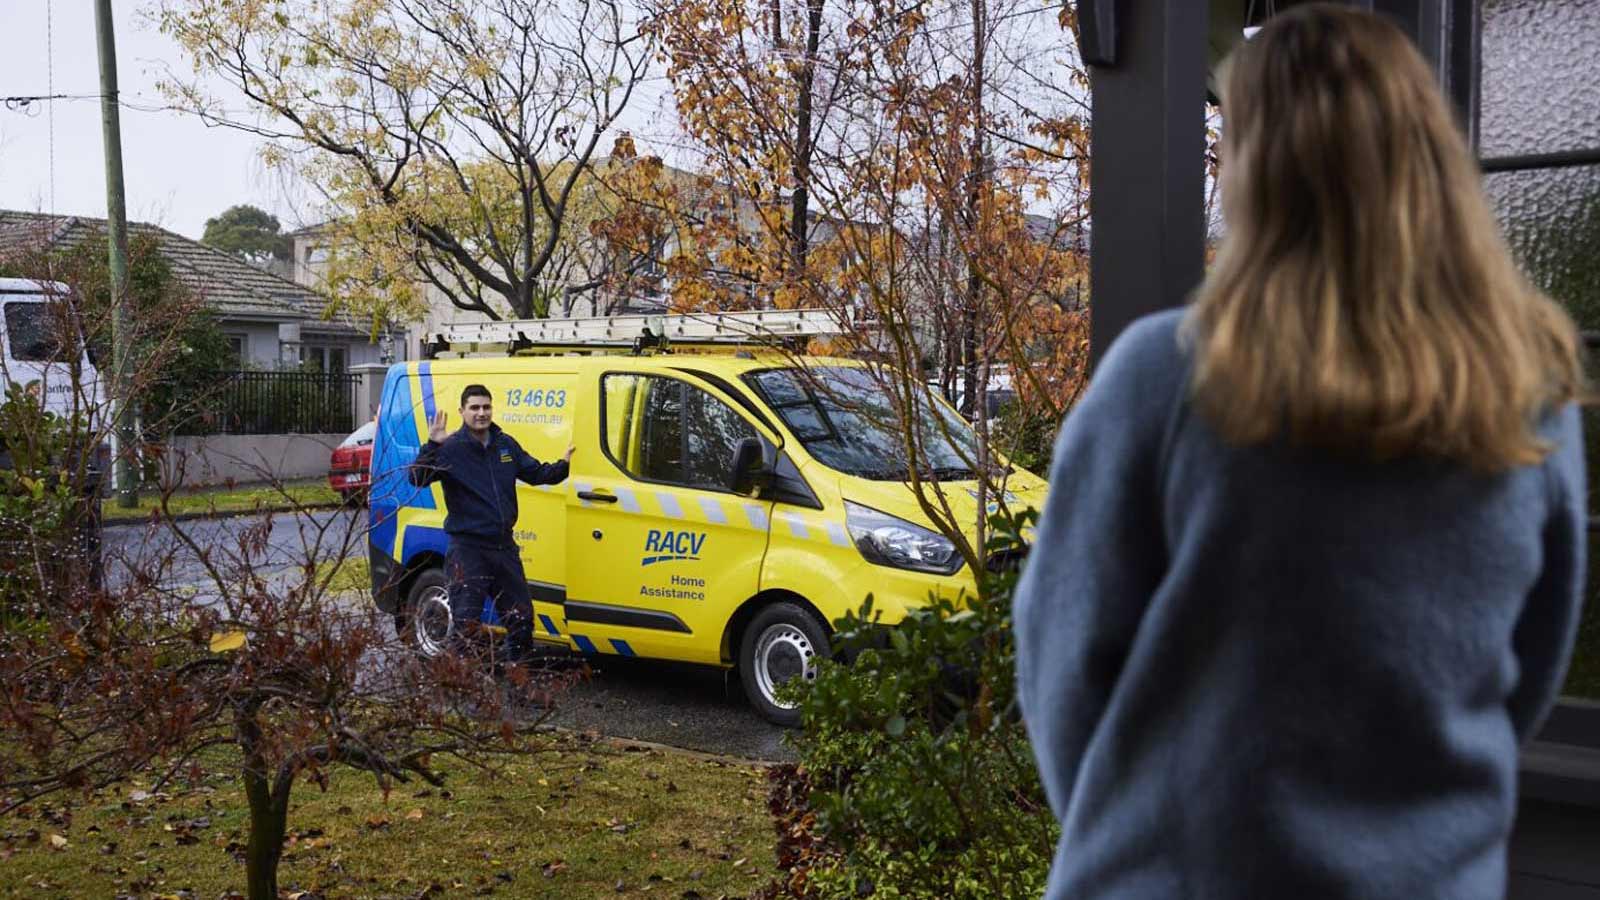 RACV Tradesman in the driveway, holding yellow emergency trades van door open and waving at the woman standing at the front door of a home.